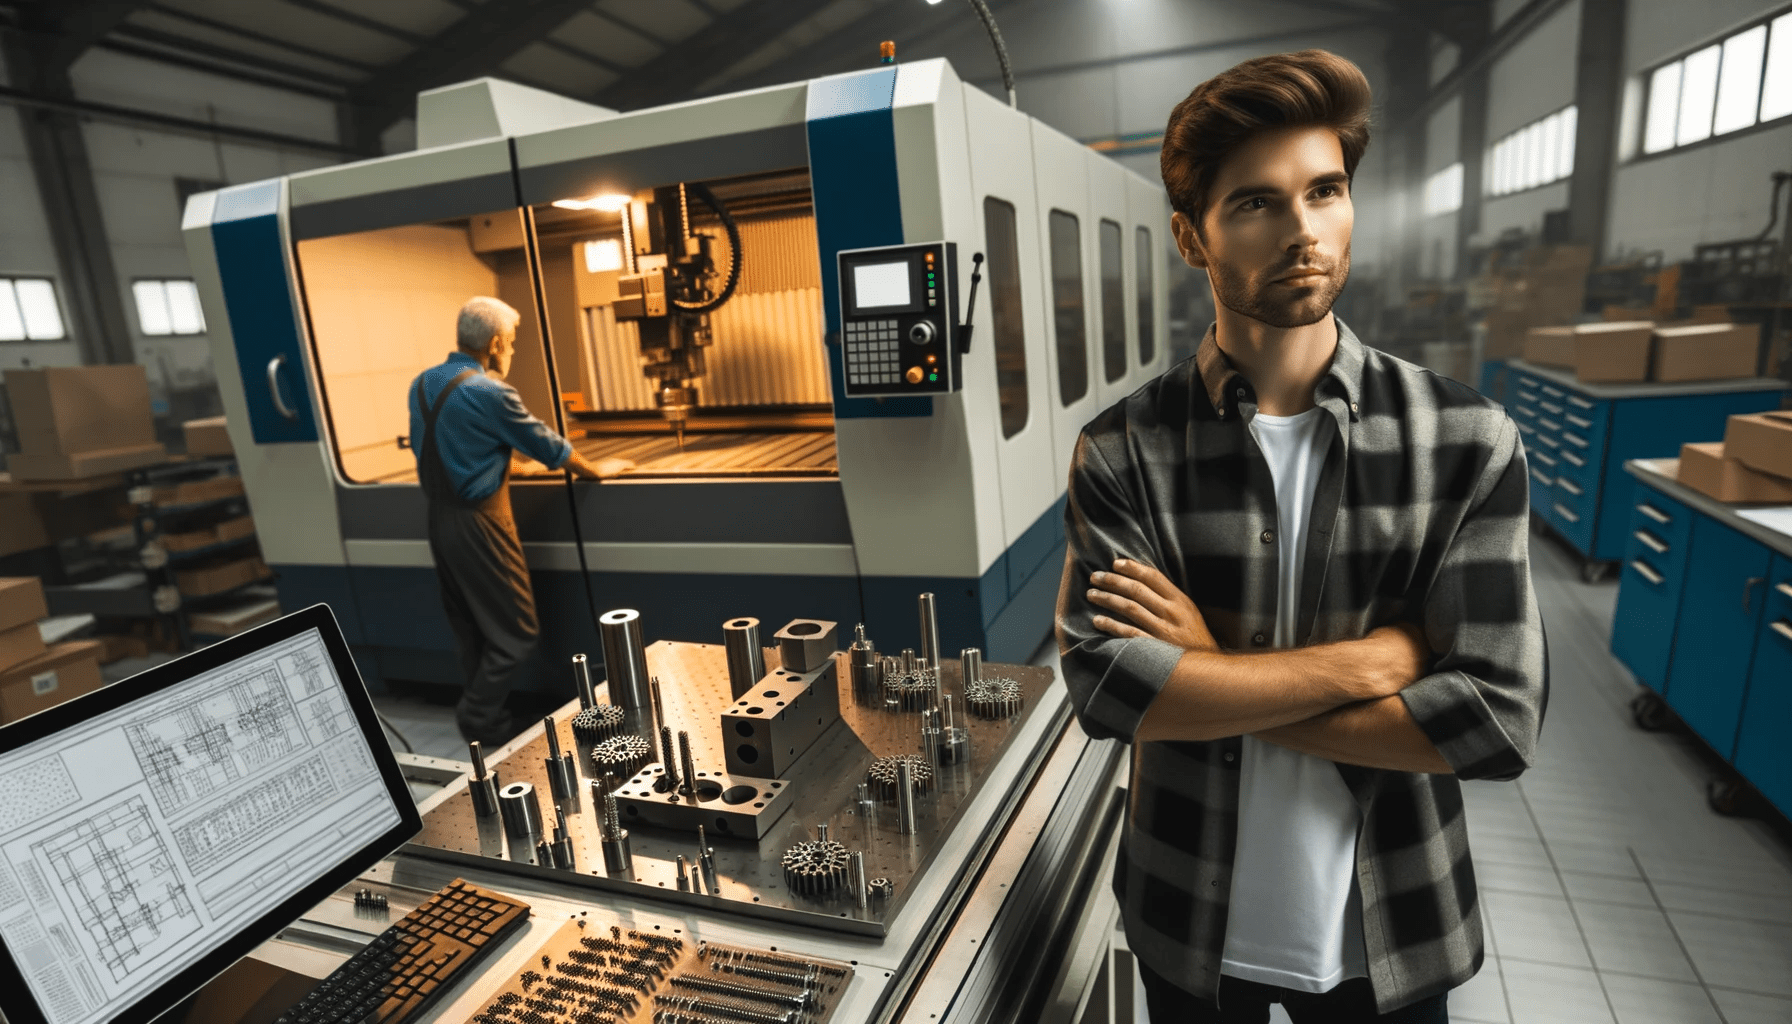 Photo of a modern workshop where a man stands attentively behind a CNC machine, monitoring its operations and ensuring precision